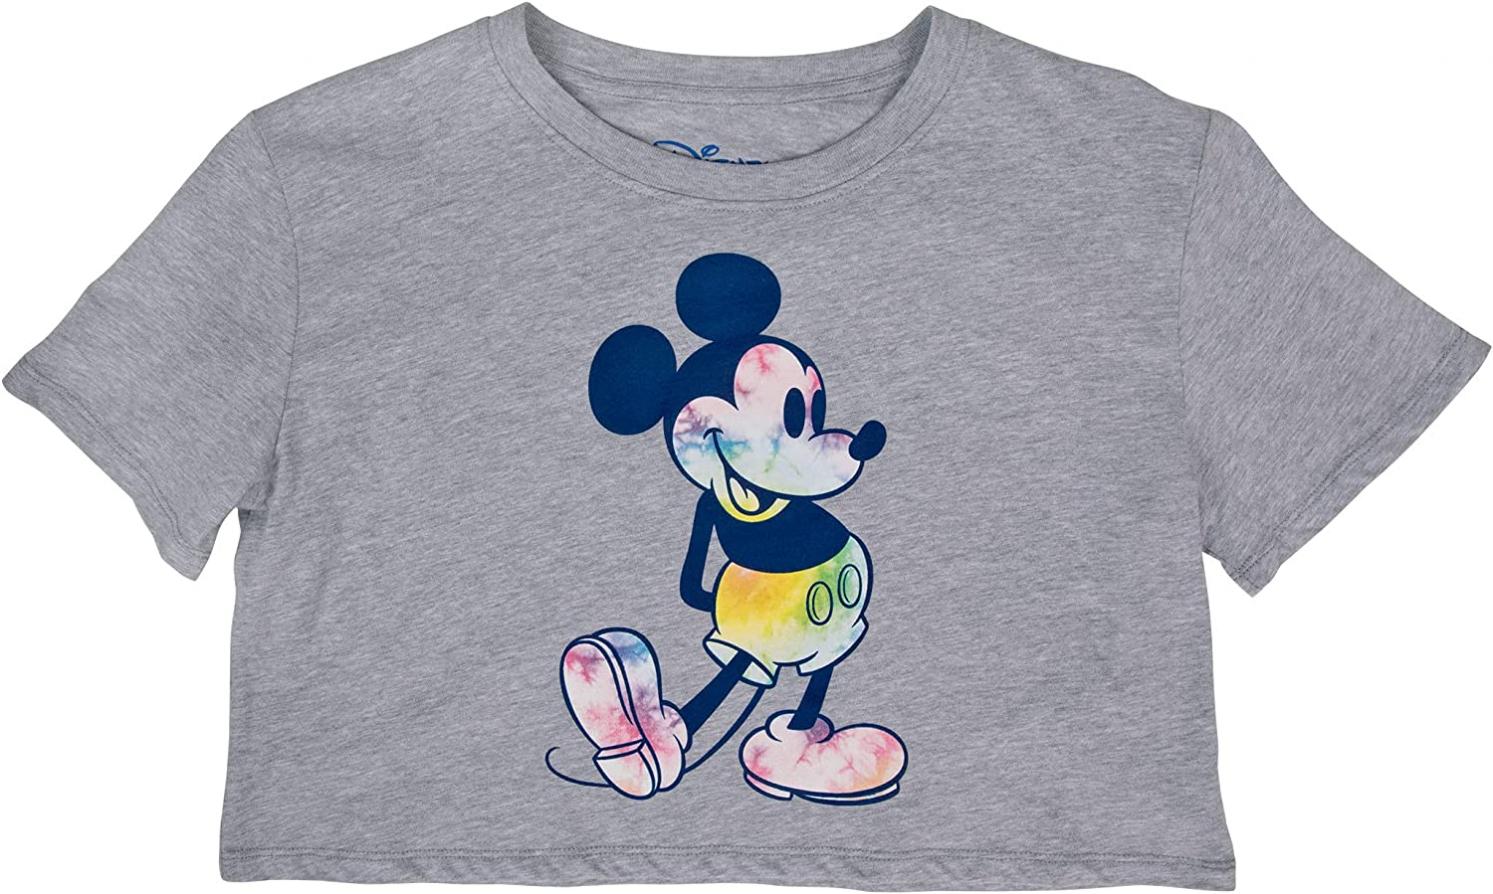 Disney Junior Multicolored Tie Dye Mickey Mouse Gray Crop Top, Shirts for Girls